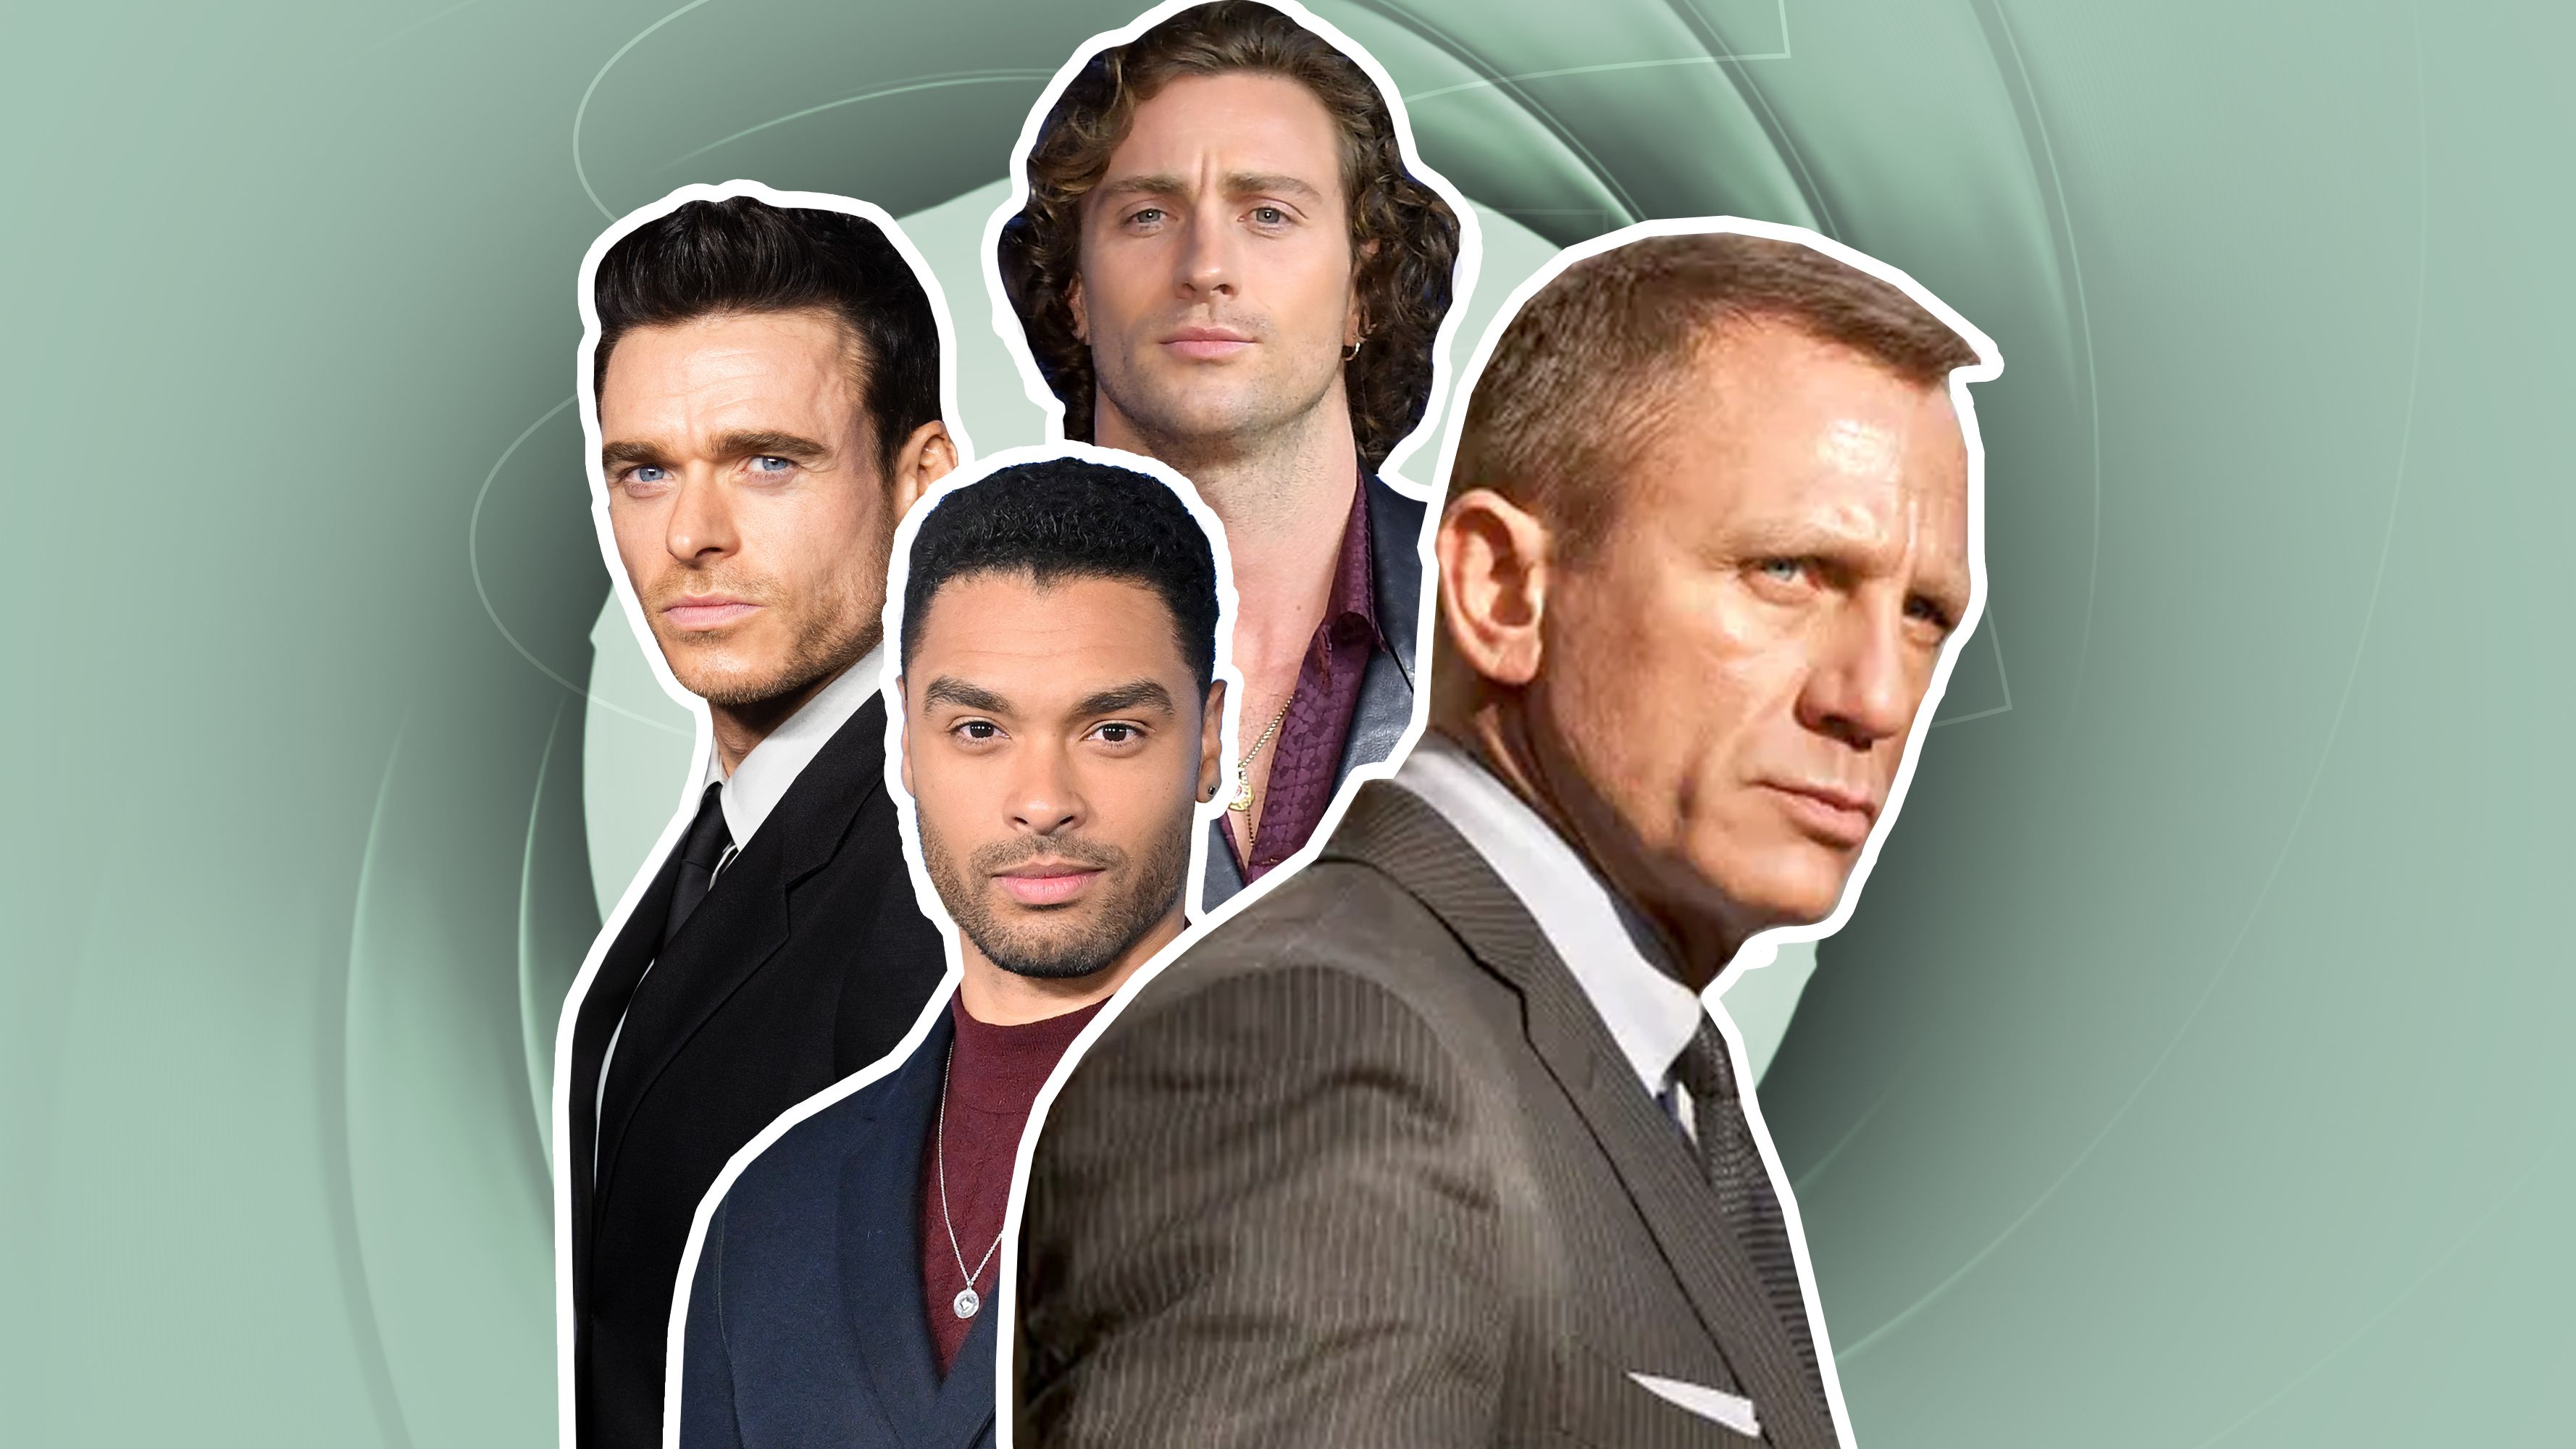 Next James Bond: Who Will Be the Next 007 Actor?